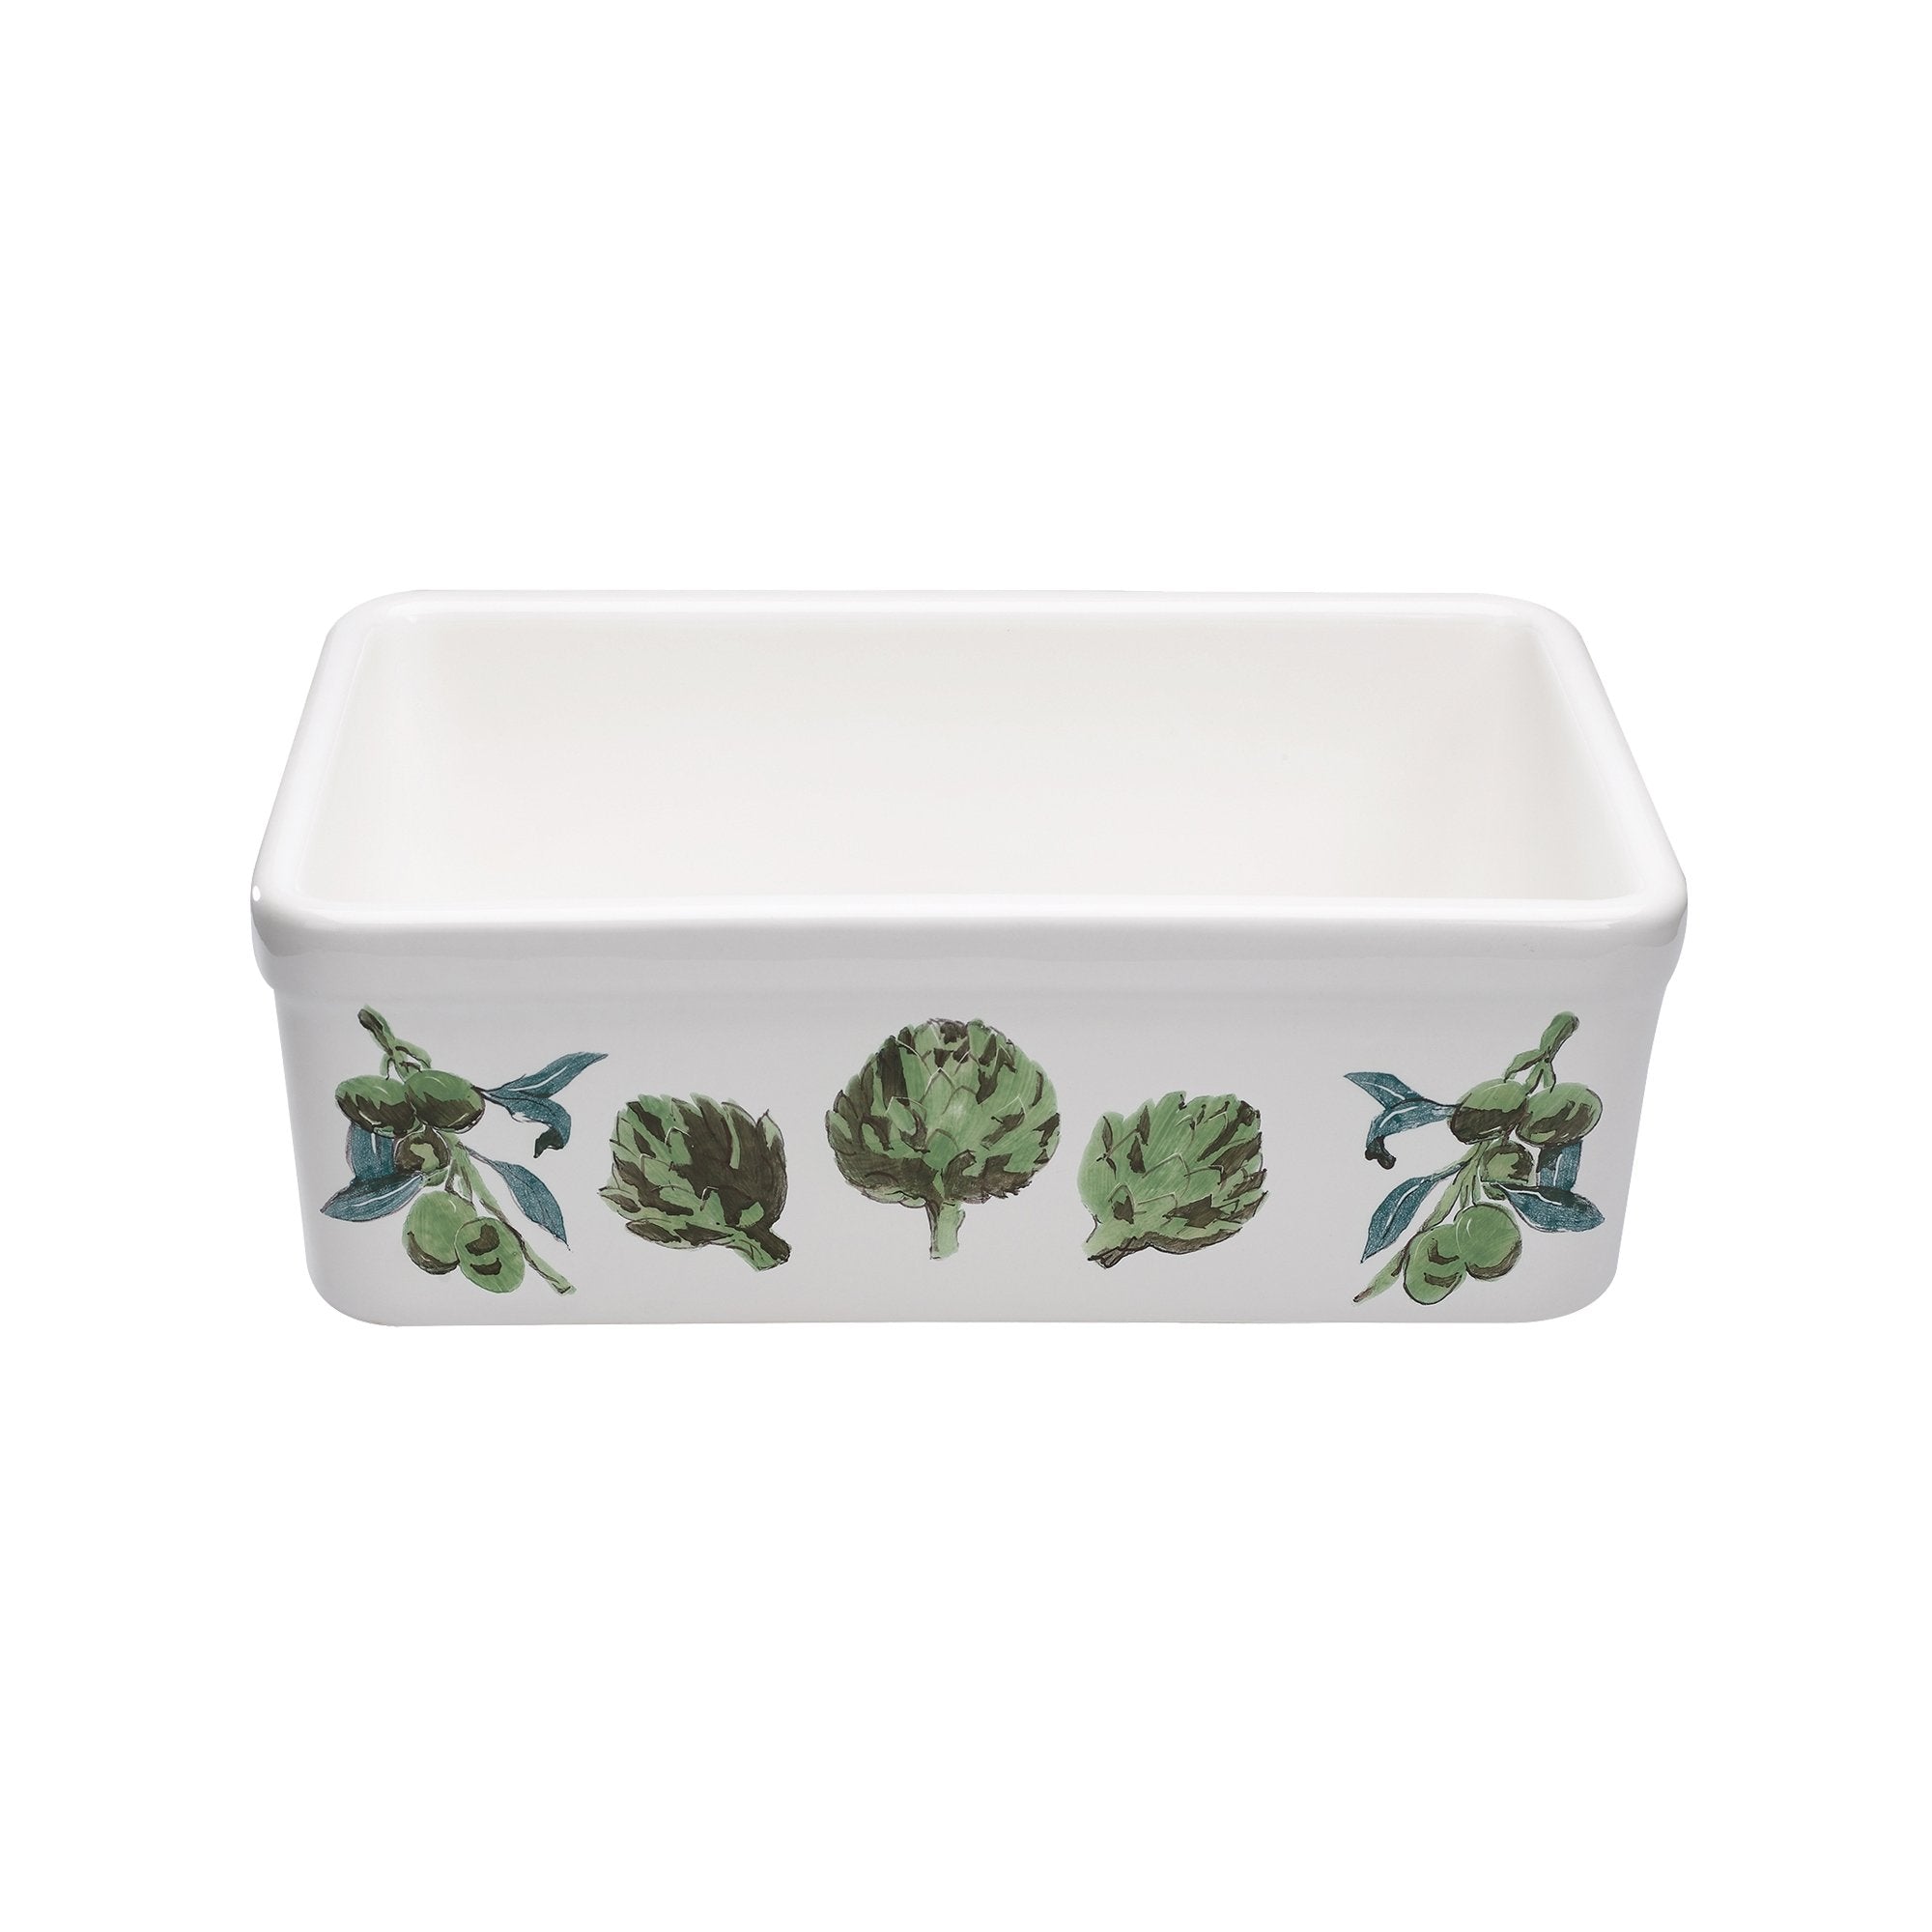 24" Single bowl hand-painted fireclay kitchen sink